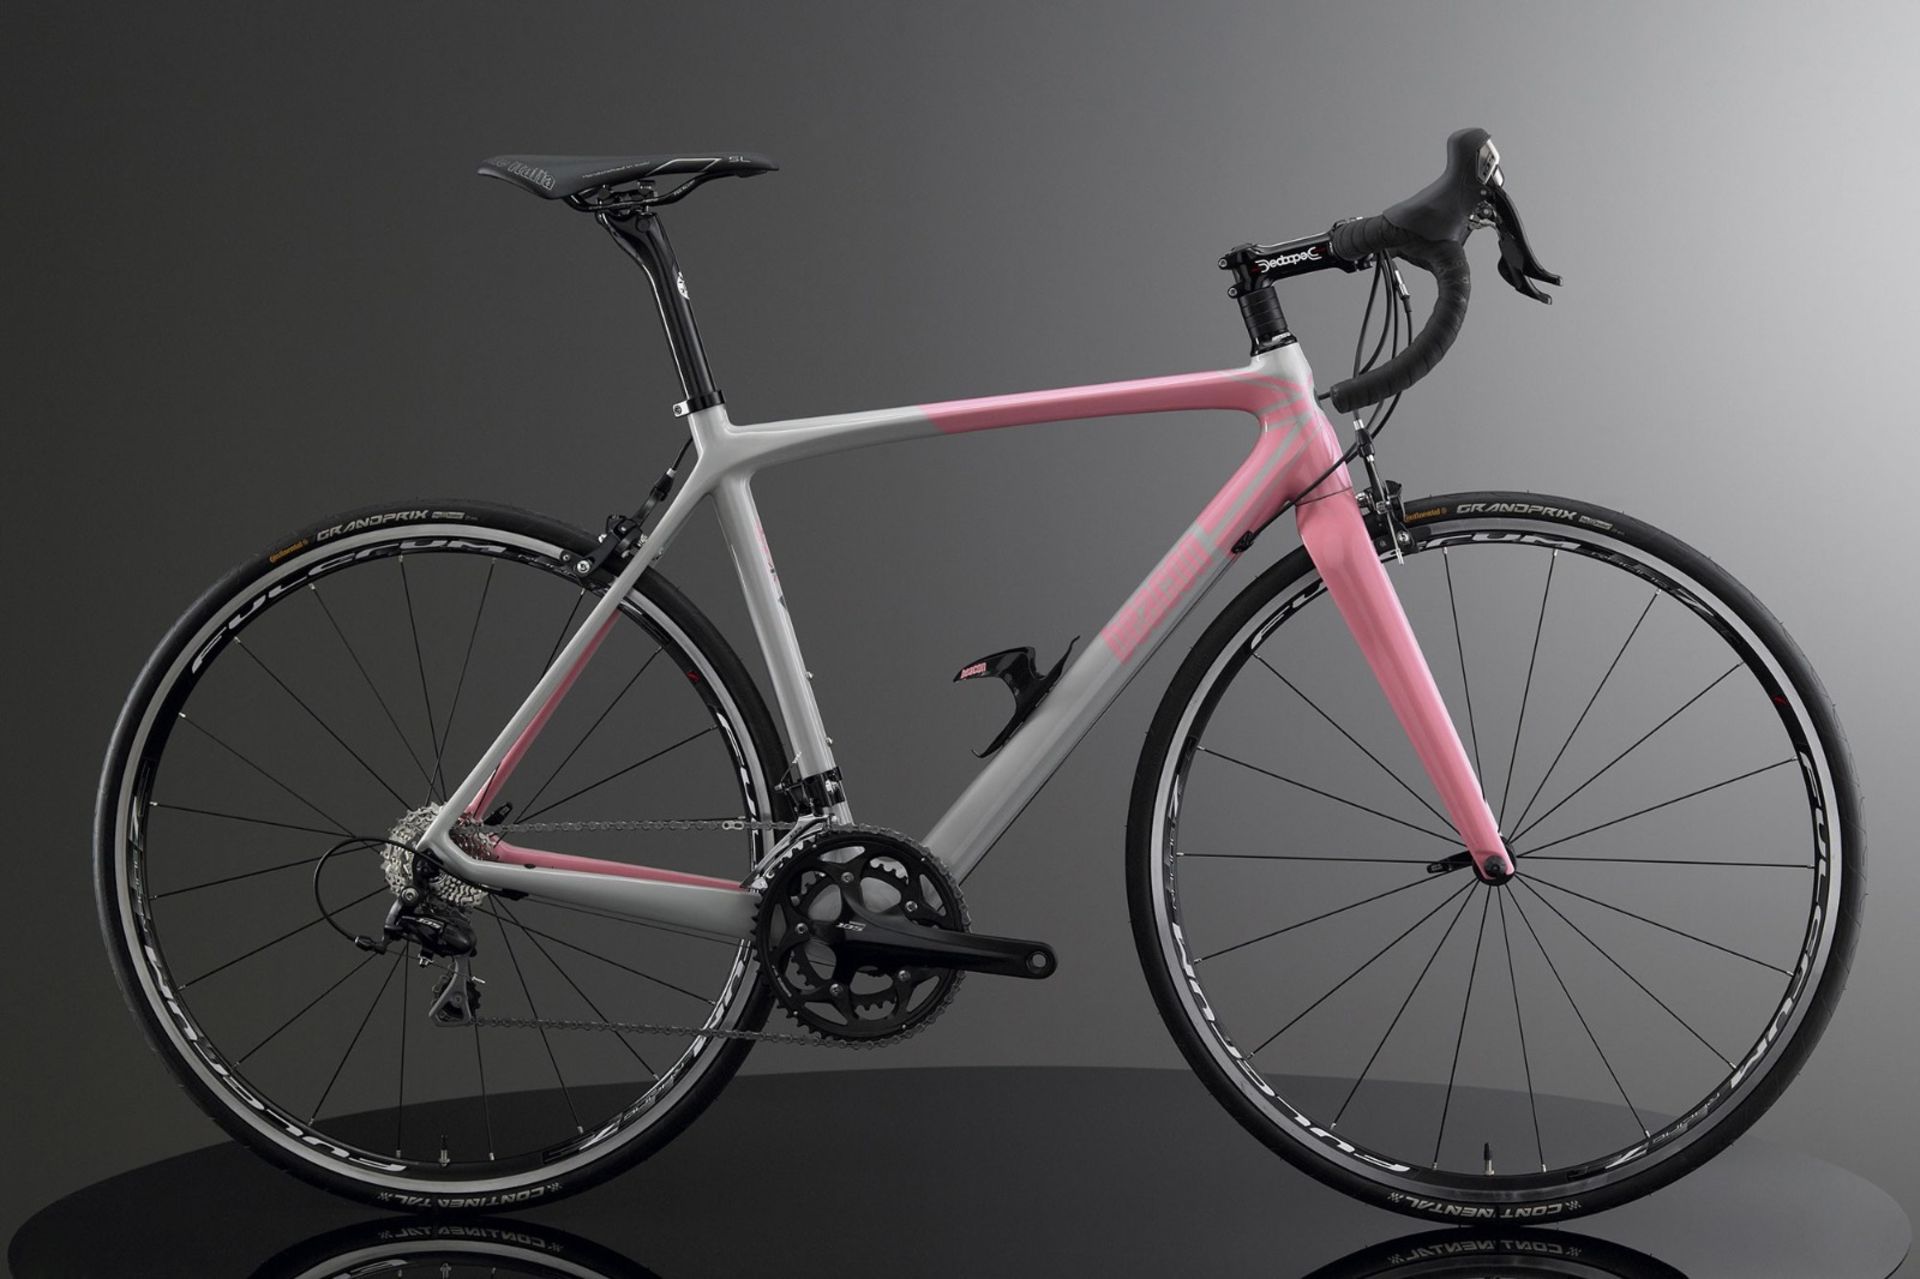 1 x Beacon Model BF-70, Size 540, Carbon Fibre Bike Frame in Grey & Pink. - Image 2 of 3